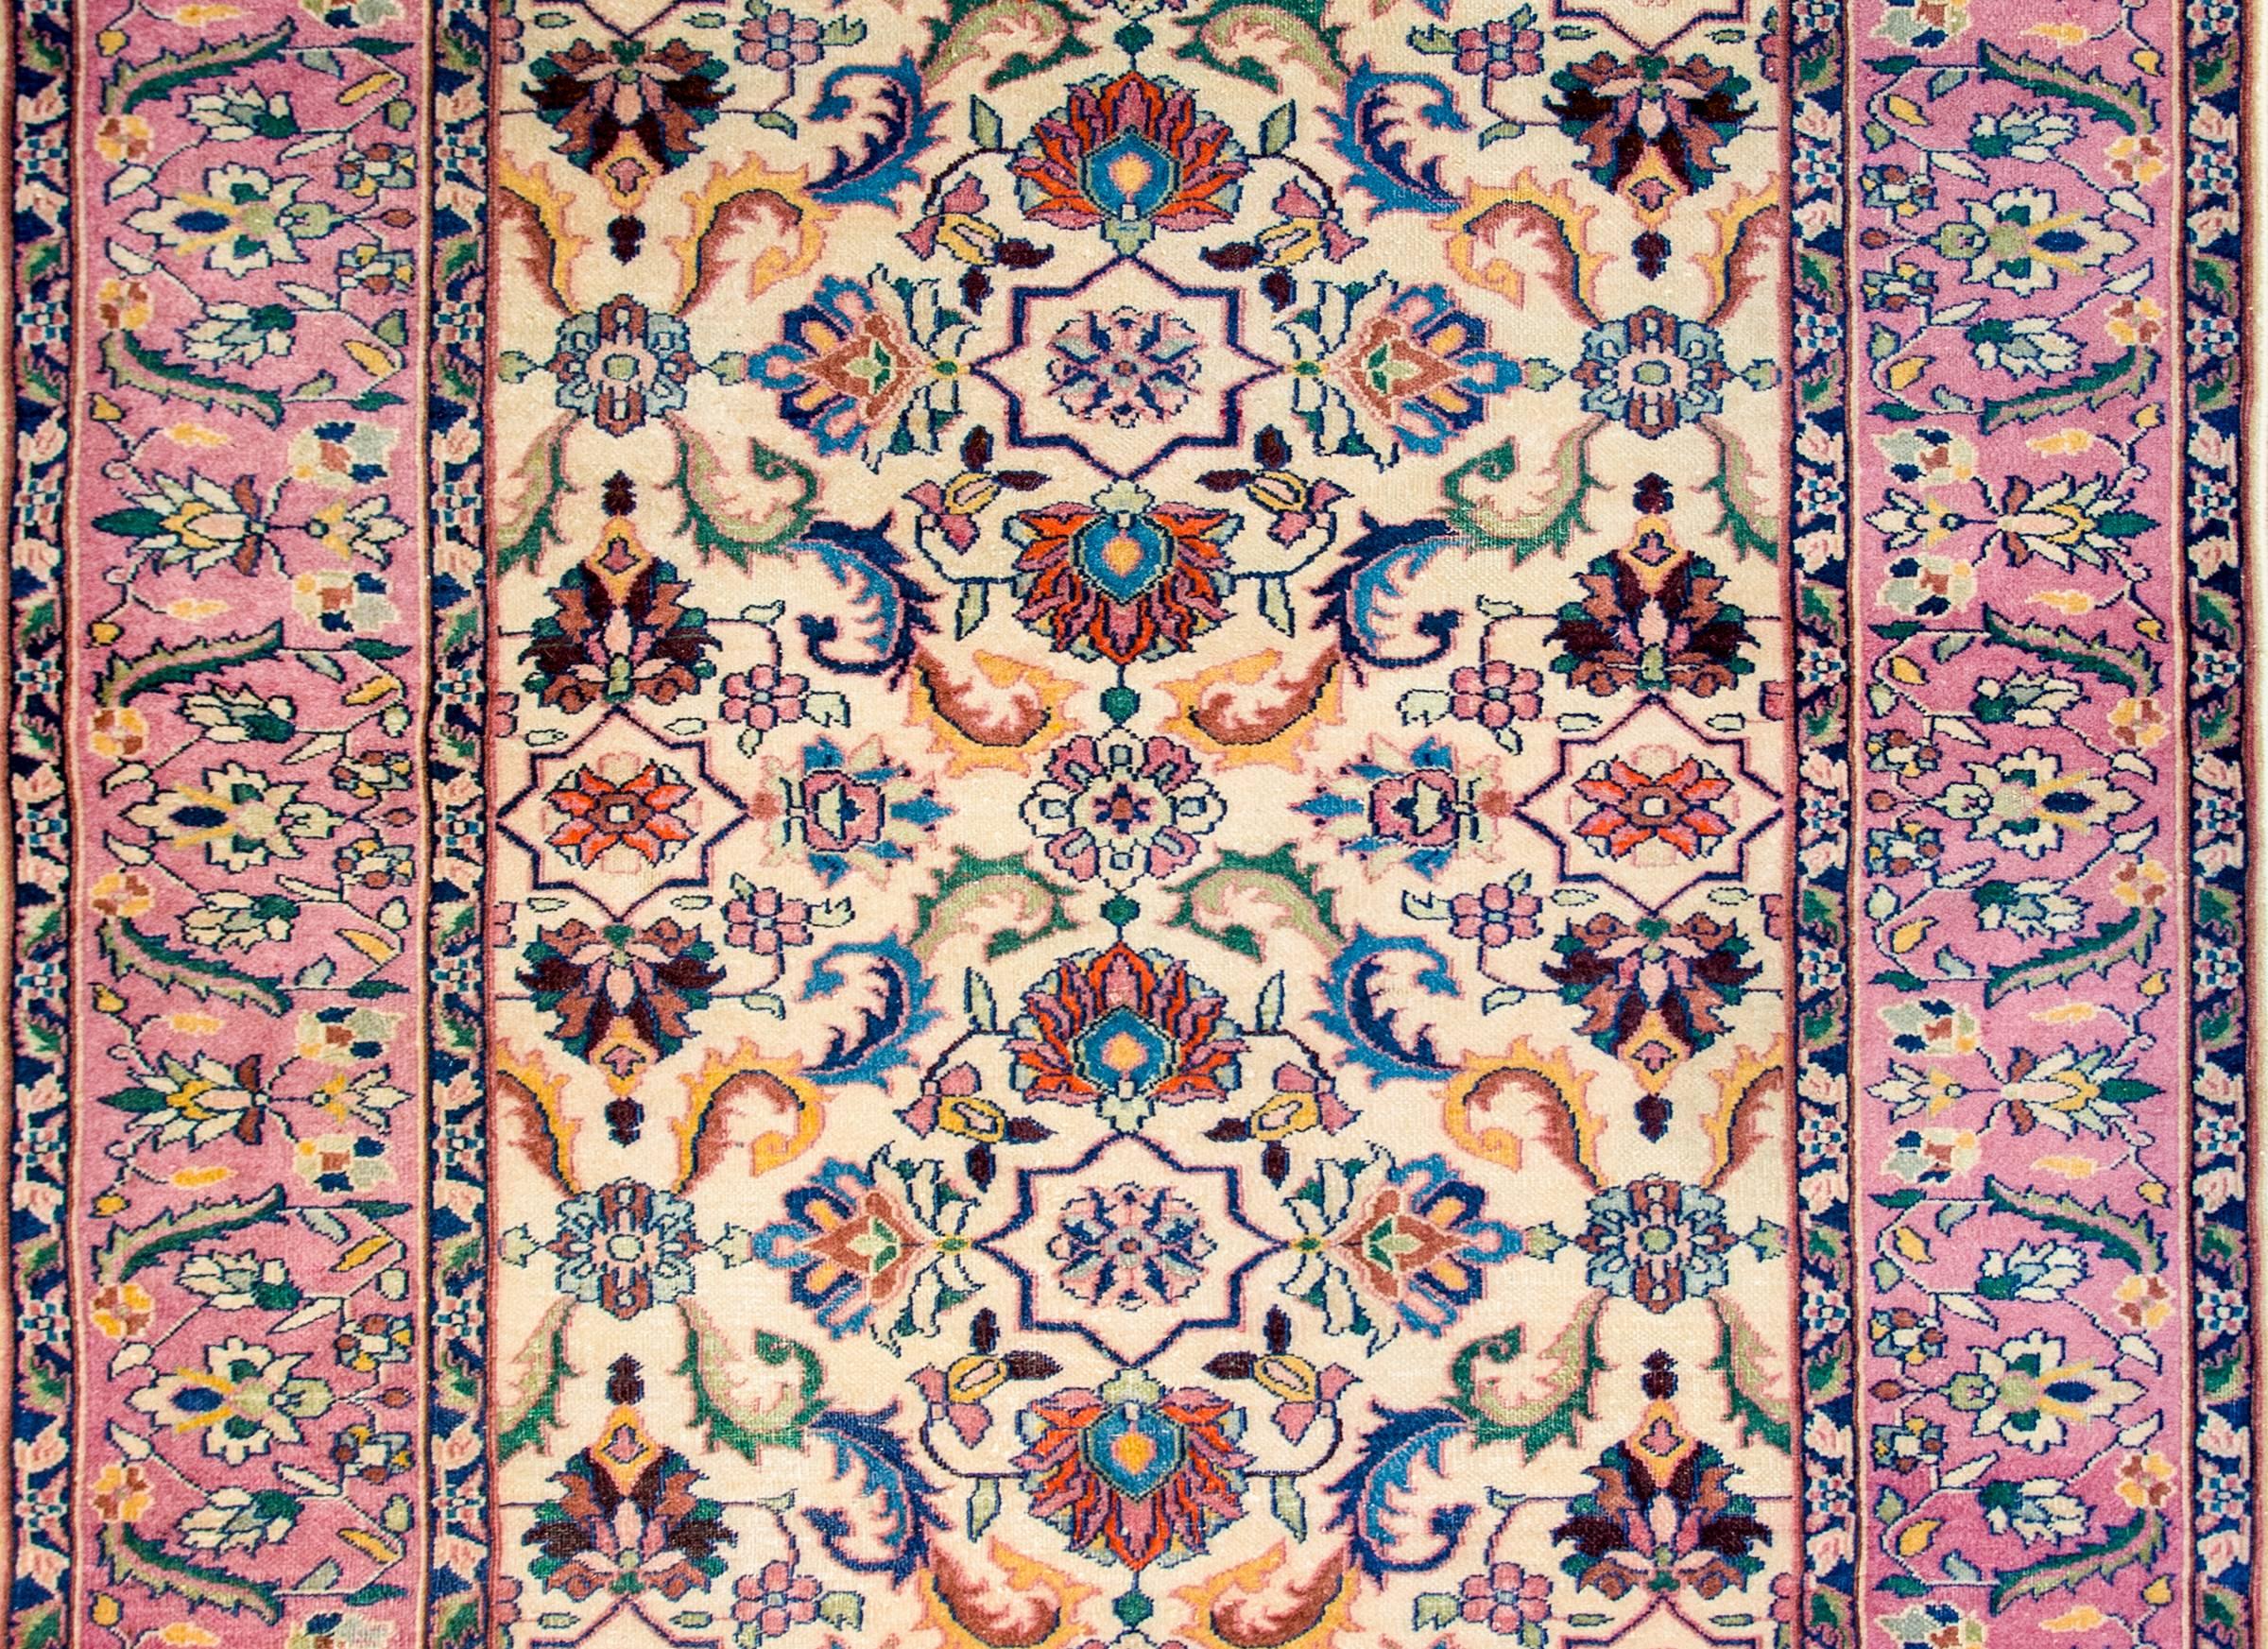 An early 20th century Indian Agra rug with a wonderful large-scale mirrored multicolored floral and vine pattern on a cream colored background. The border is wide with a central floral and vine patterned central strip flanked by matching petite